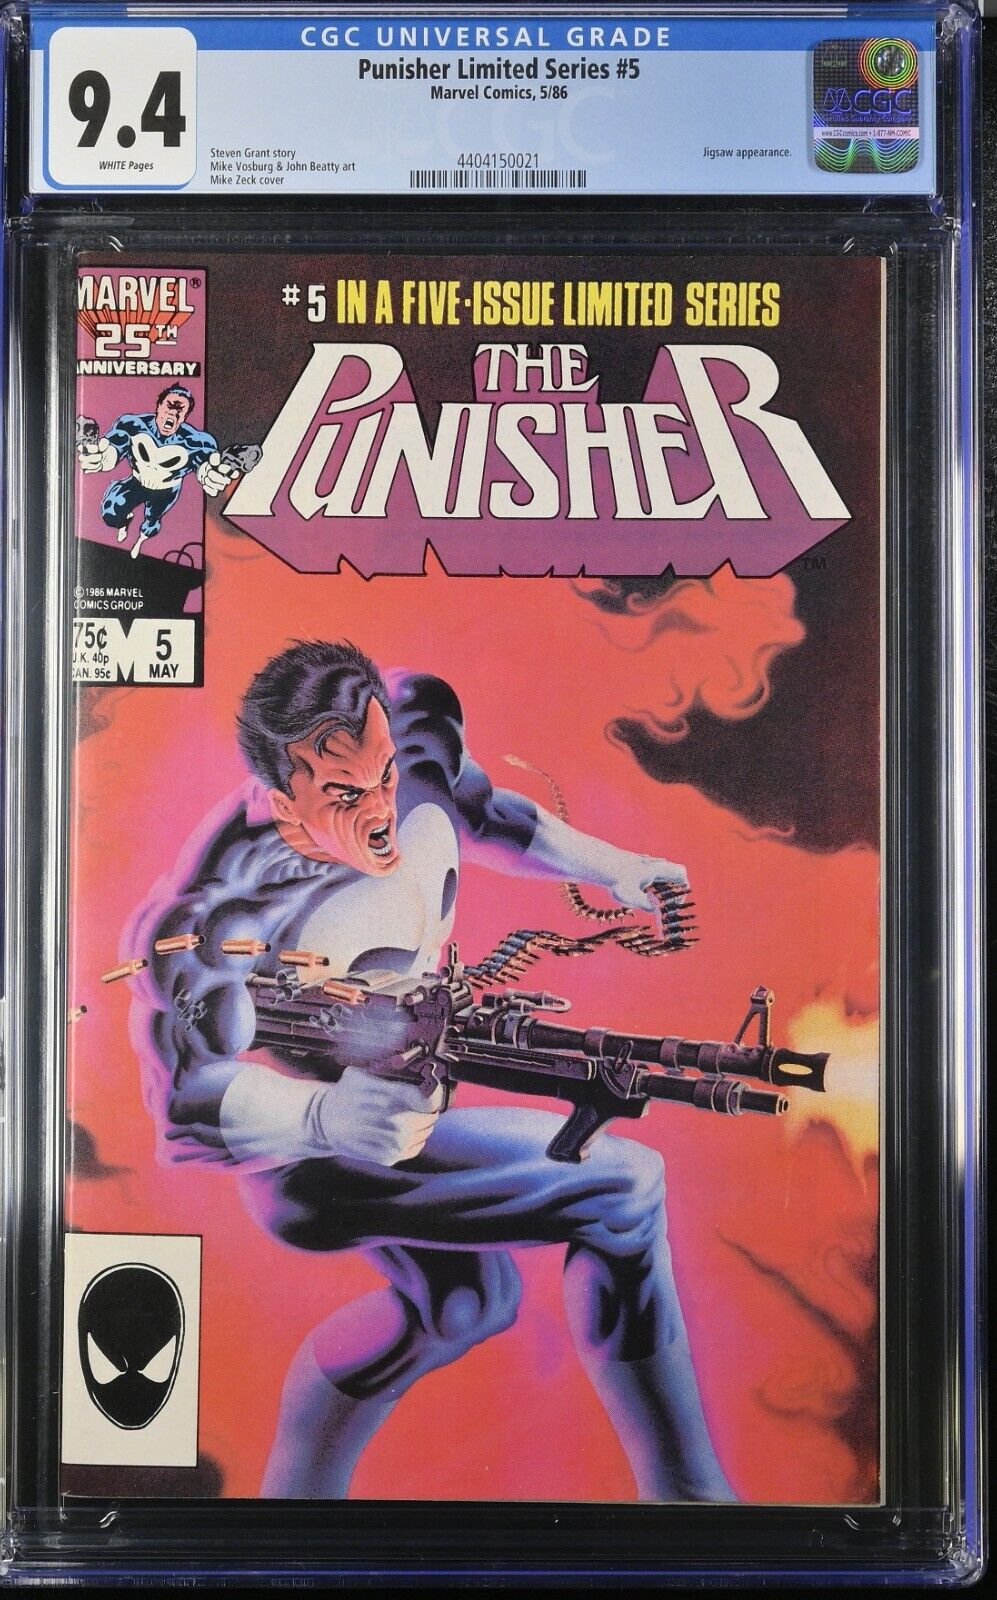 🔑🔥🔥🔥  Punisher Limited Series #5 CGC 9.4 1986 💀💀💀💀💀💀 Mike Zeck 150021